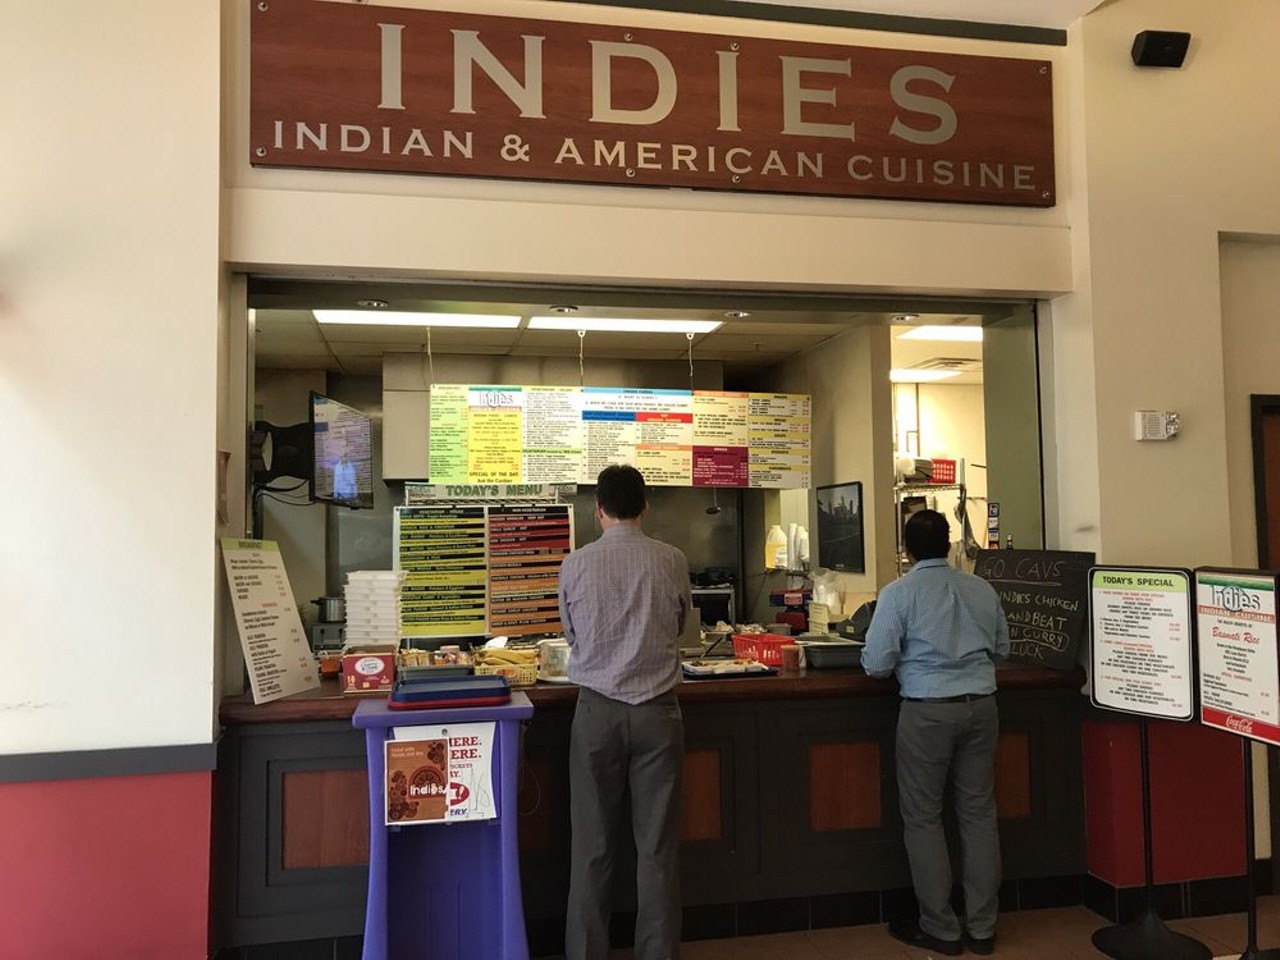  Indies
530 Euclid Ave., Cleveland
&#147;After hearing so much about this place I finally went and they did not disappoint!
I might as well have been having my Punjabi grandma&#146;s home cooking! I had the mattar paneer, dal makhni, aloo gobhi and malai kofta with basmati rice. Oh so good! Rest assured I will be back. The owners of Indies are so nice - great service! If you want to know what North Indian home cooking tastes like go here,&#148; Manpreet S. on Yelp
Photo via Scene Archives